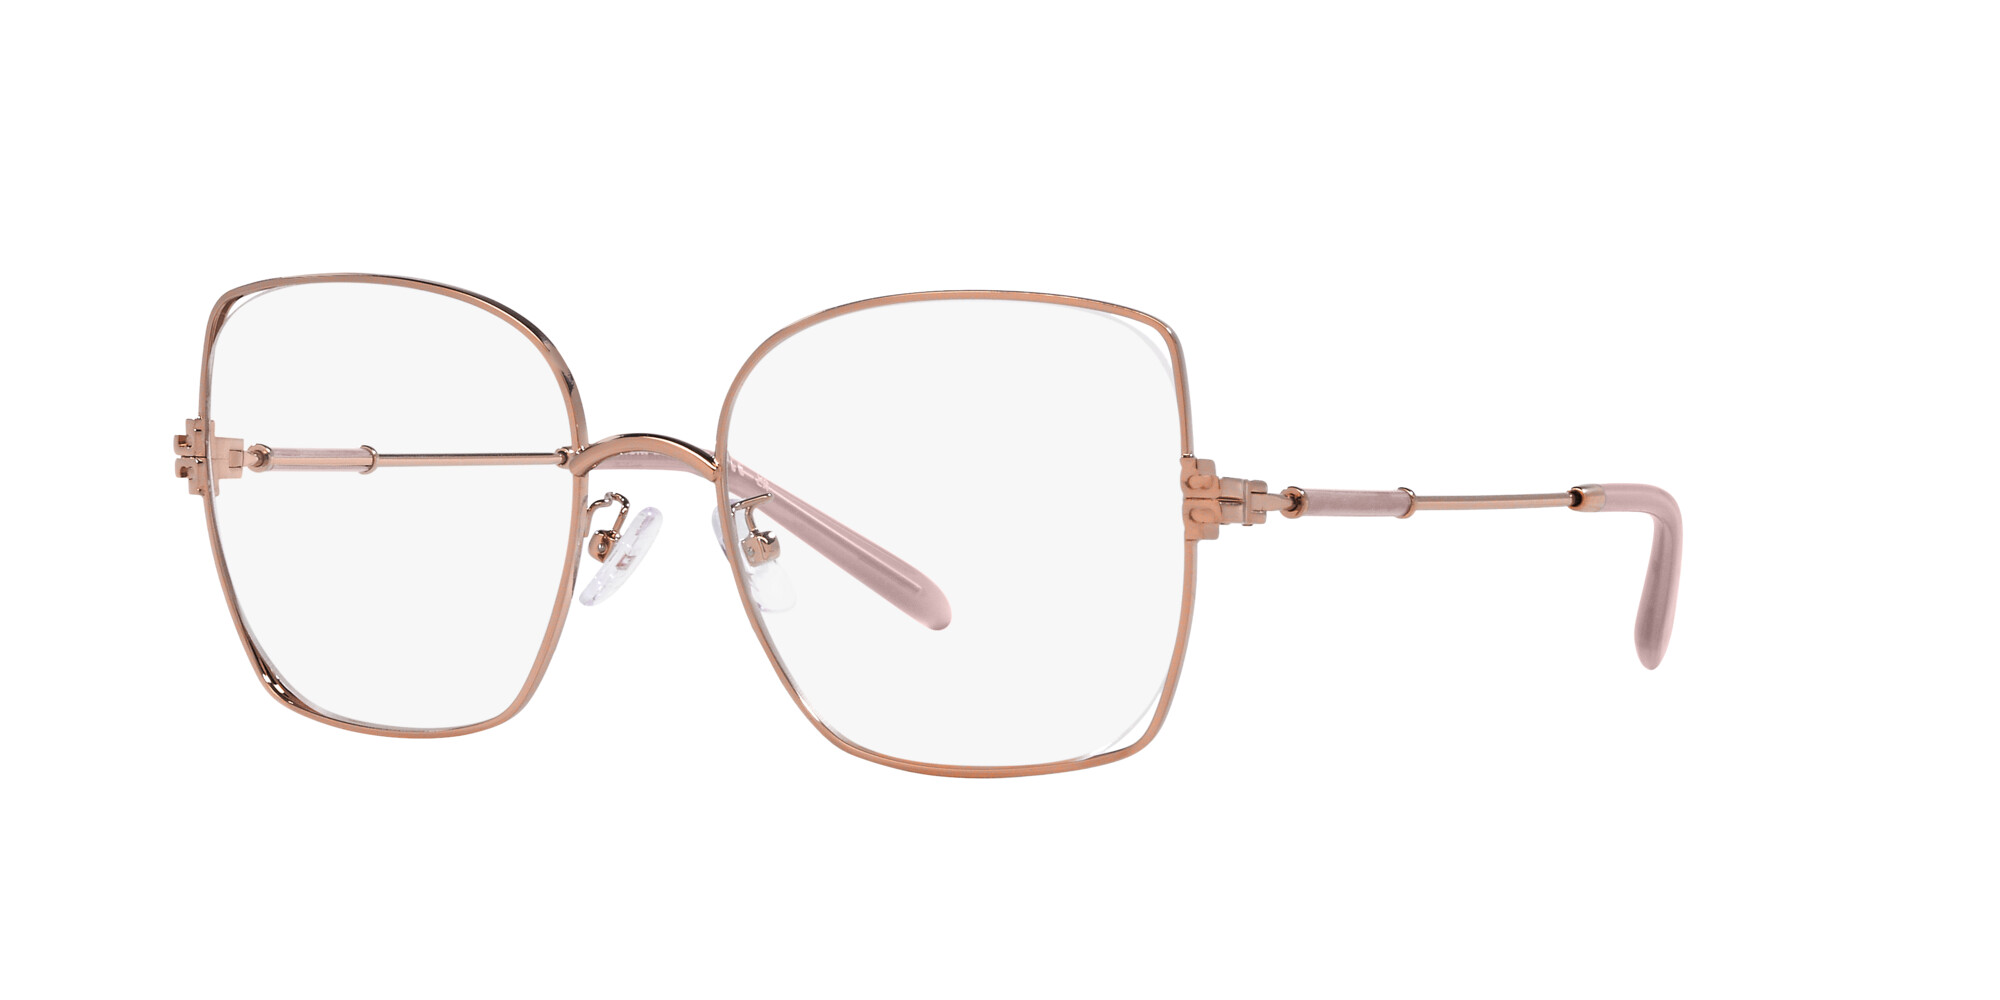 Angle_Left01 Tory Burch 0TY1079 3340 Brille Pink Gold